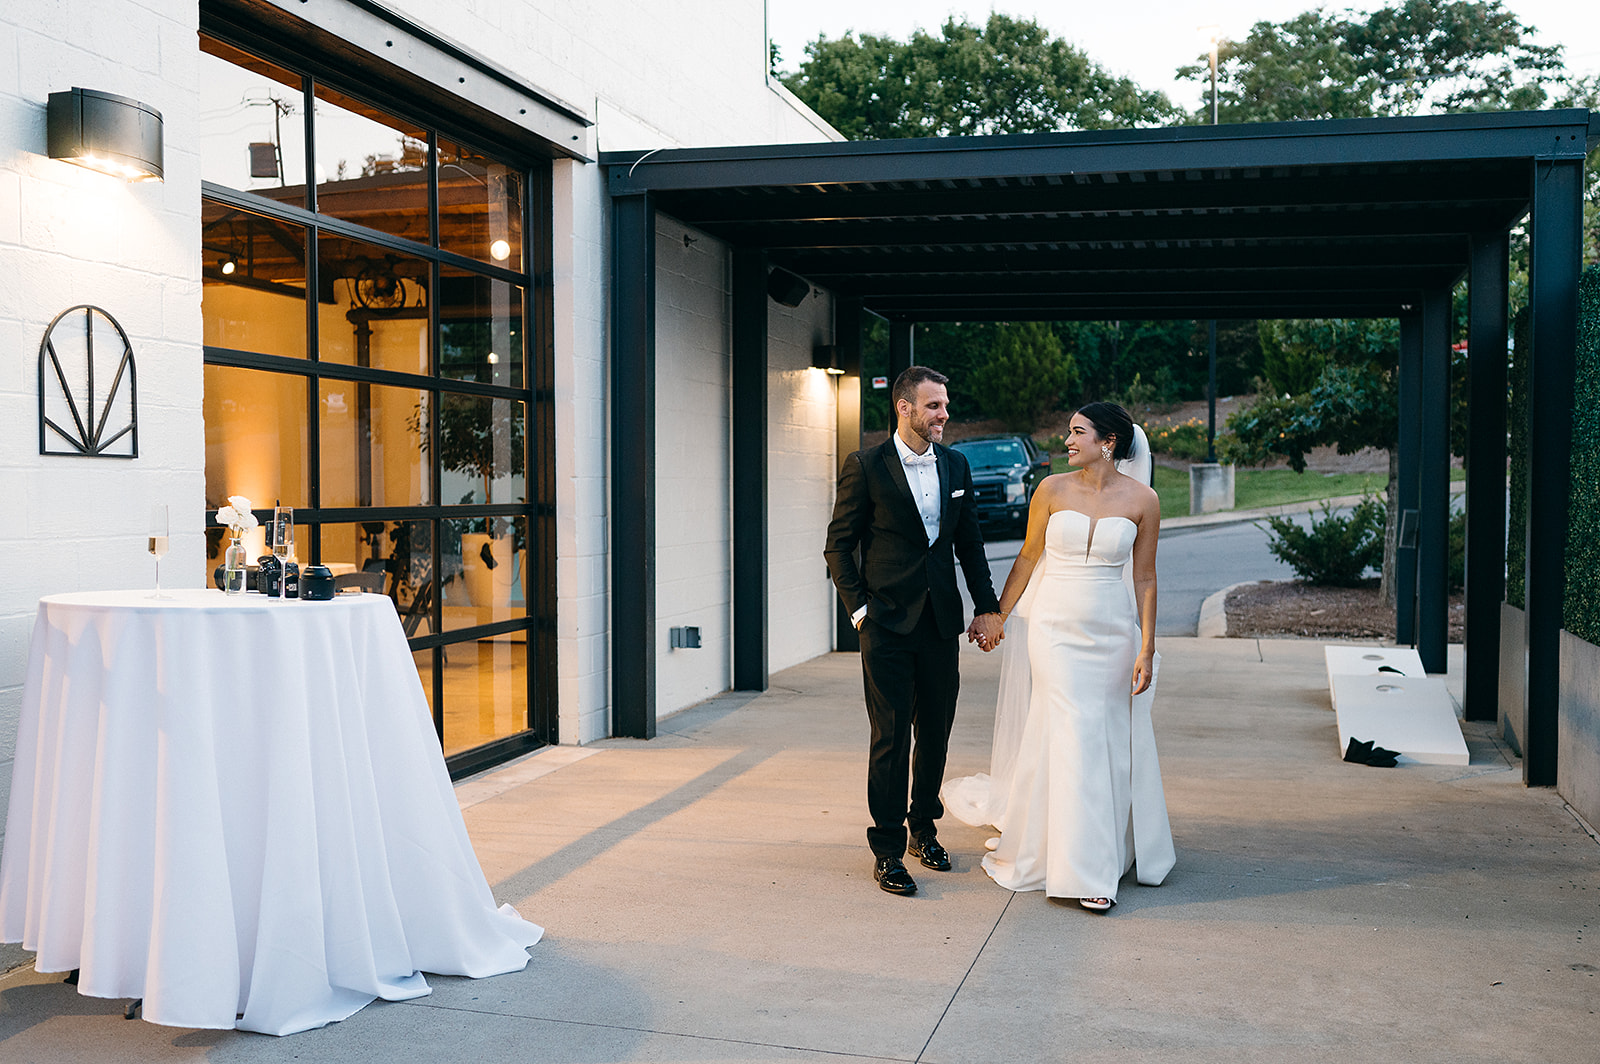 Newlyweds walk through the patio at sunset holding hands at Saint Elle Wedding venue